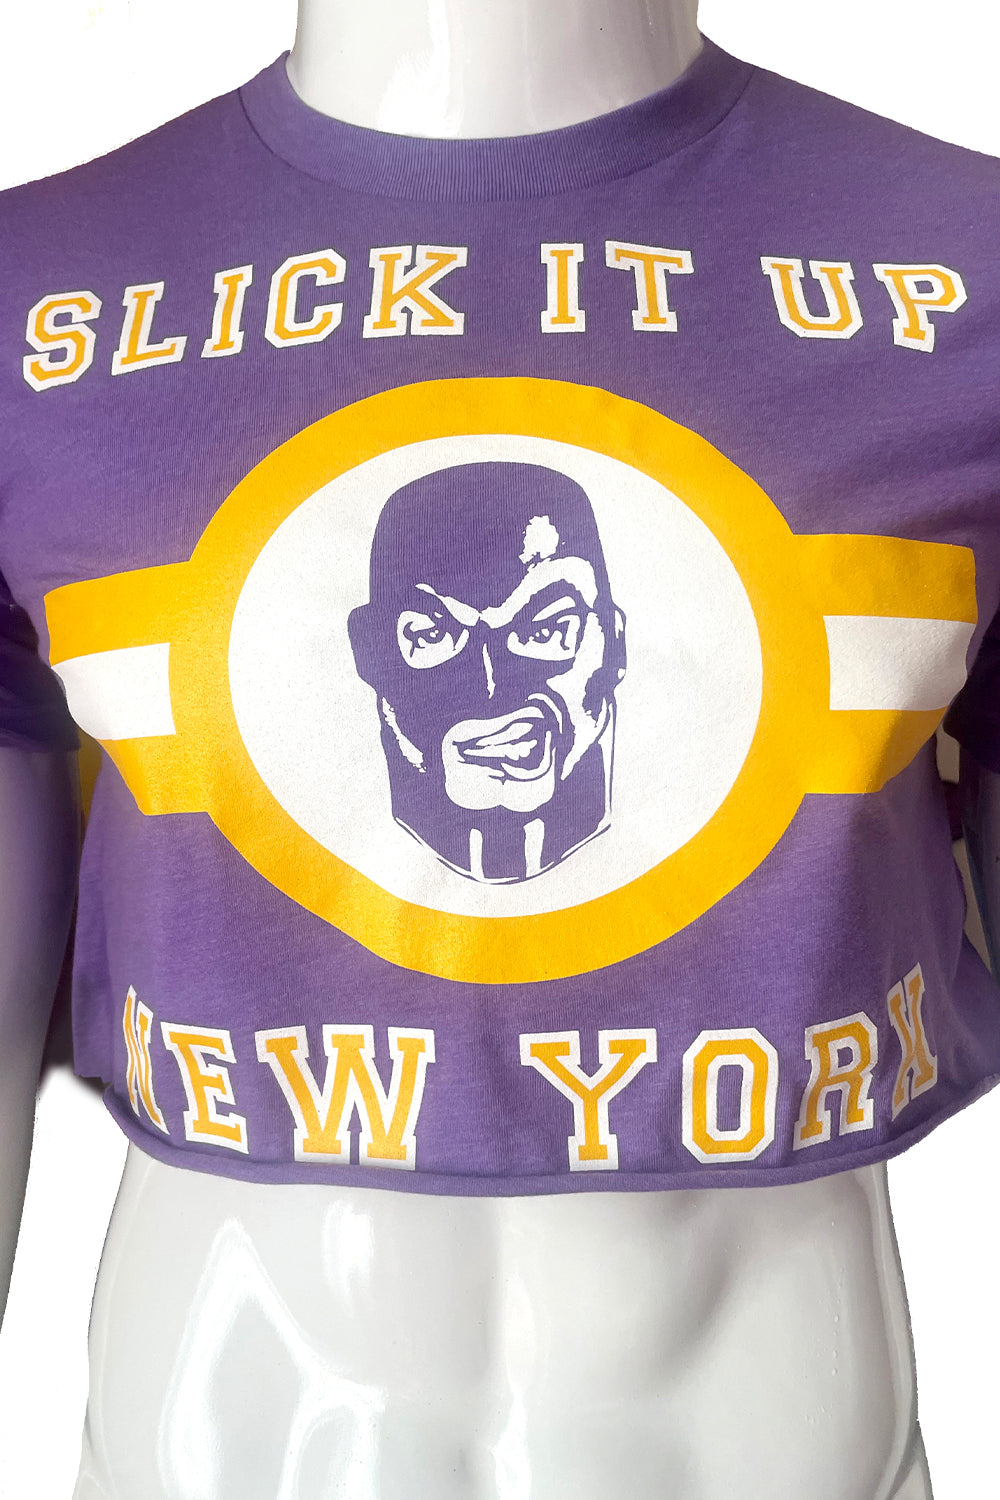 Purple and Gold Football Cut Crop Top - Slick It Up 